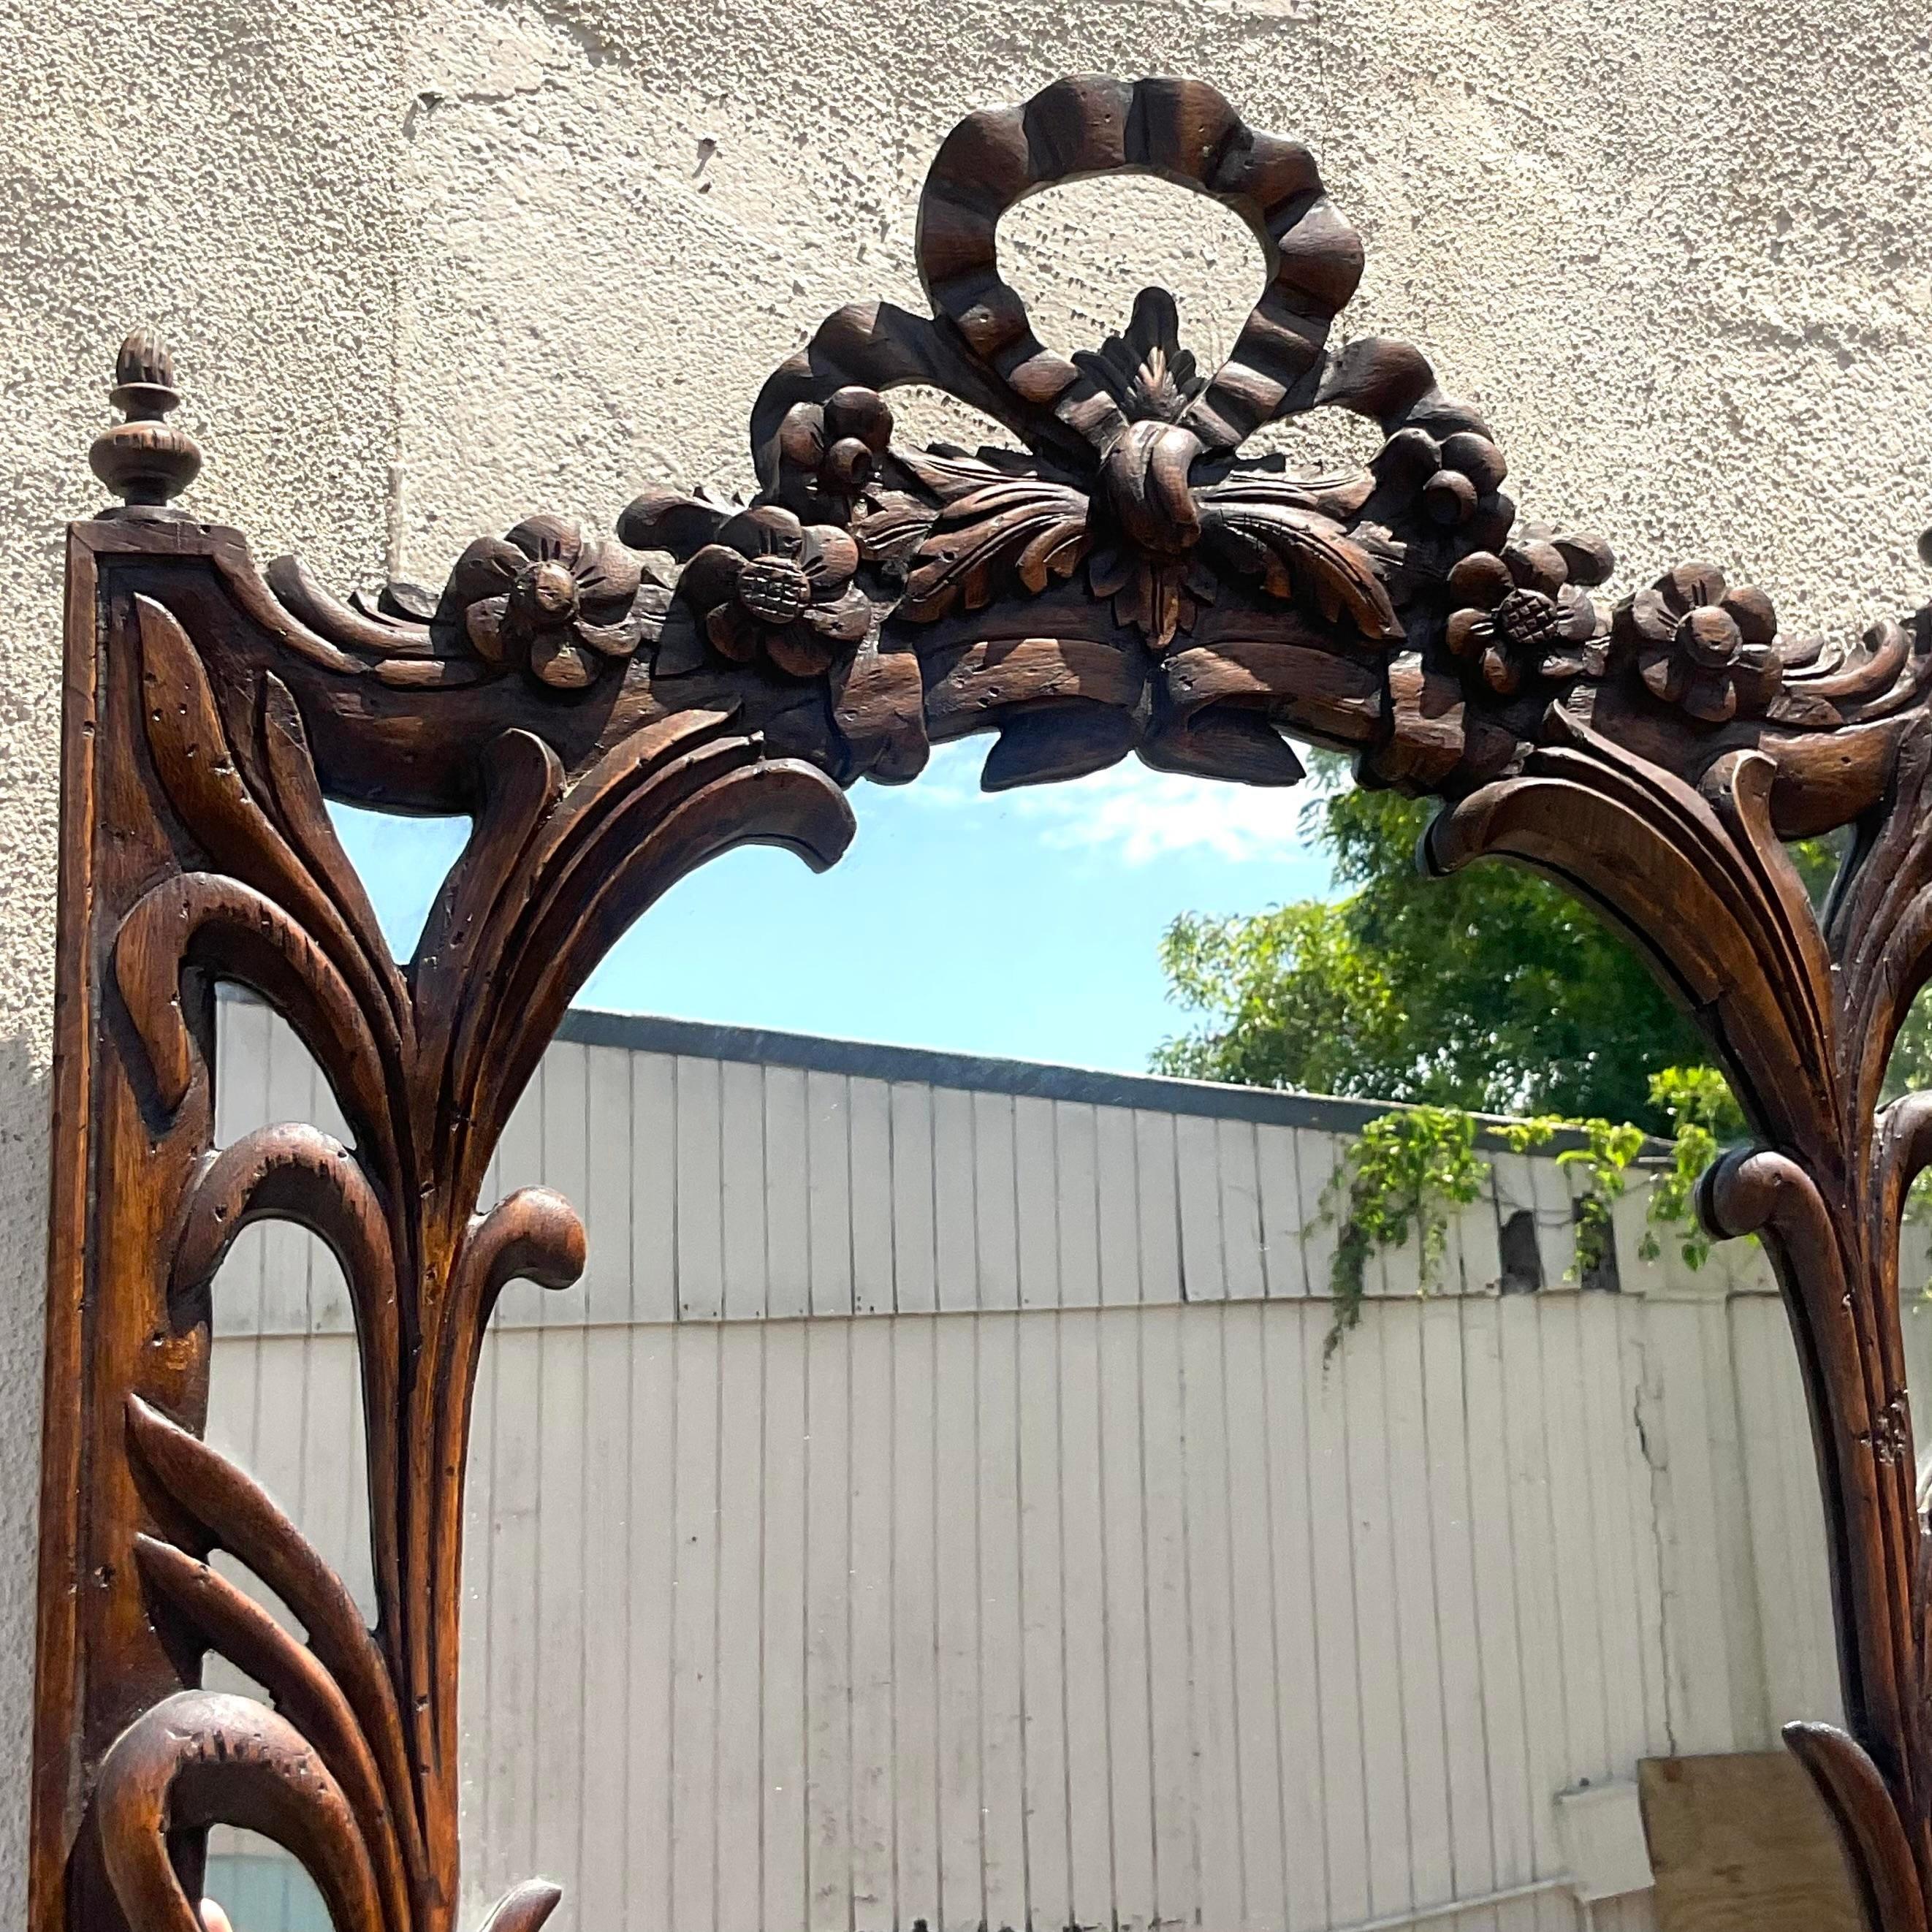 Experience timeless elegance with our Vintage Regency Carved Bow and Lily Mirror. American-crafted with exquisite bow and lily motifs, this mirror captures classic Regency style, blending intricate carving with refined glamour for a luxurious